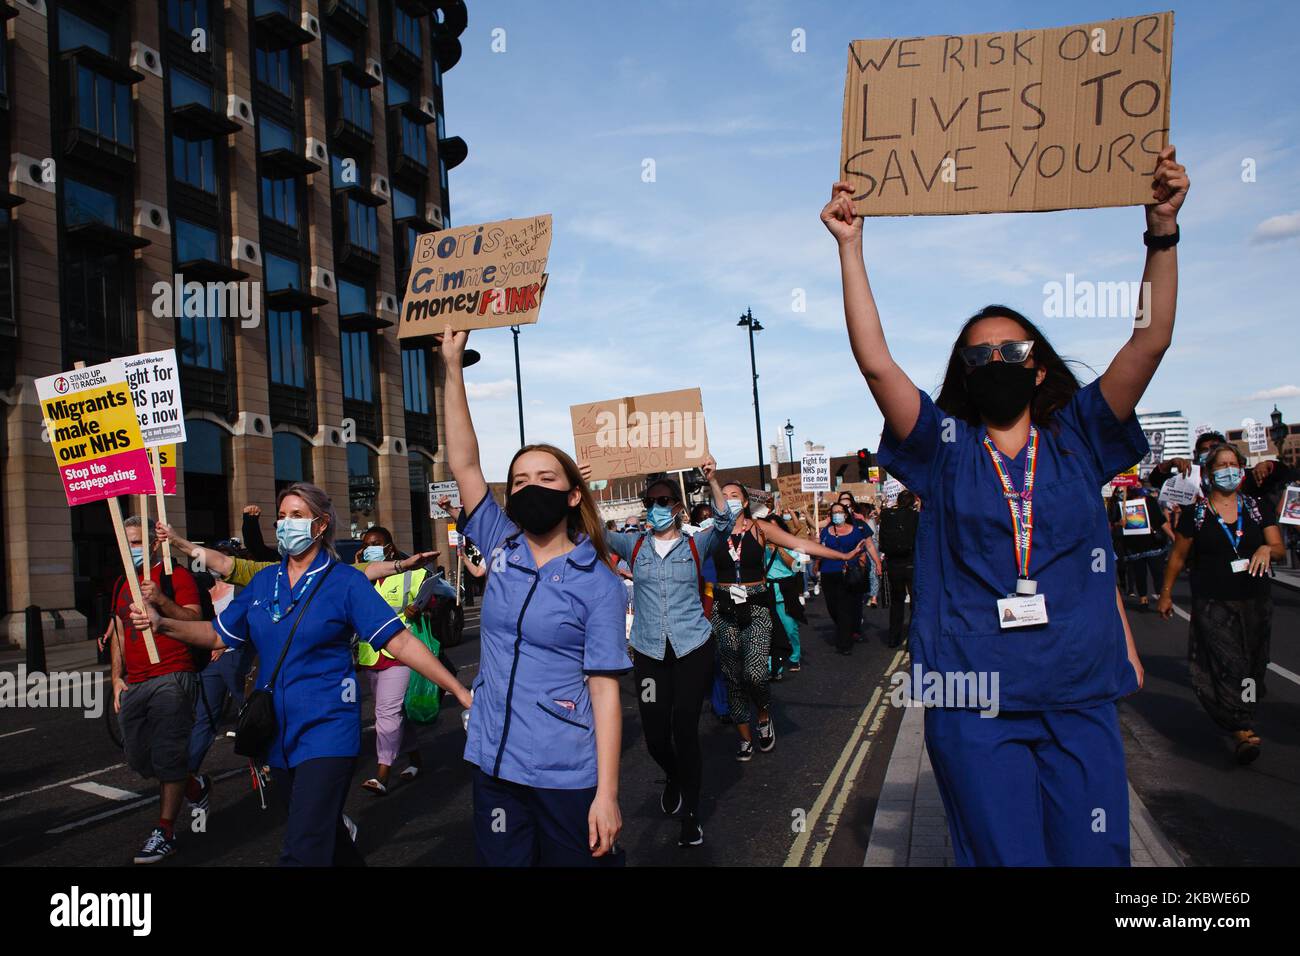 National Health Service (NHS) staff, protesting their exclusion from a recently-announced public sector pay rise, march into Parliament Square bound for Downing Street in London, England, on July 29, 2020. Around 900,000 public sector workers across the UK are set to receive above-inflation pay rises this year as a gesture of thanks from the Treasury for their efforts during the coronavirus pandemic. Within the NHS, doctors and dentists will benefit from the rises, but nurses and other frontline staff have been excluded owing to a three-year pay deal they negotiated in 2018. Nursing activists  Stock Photo